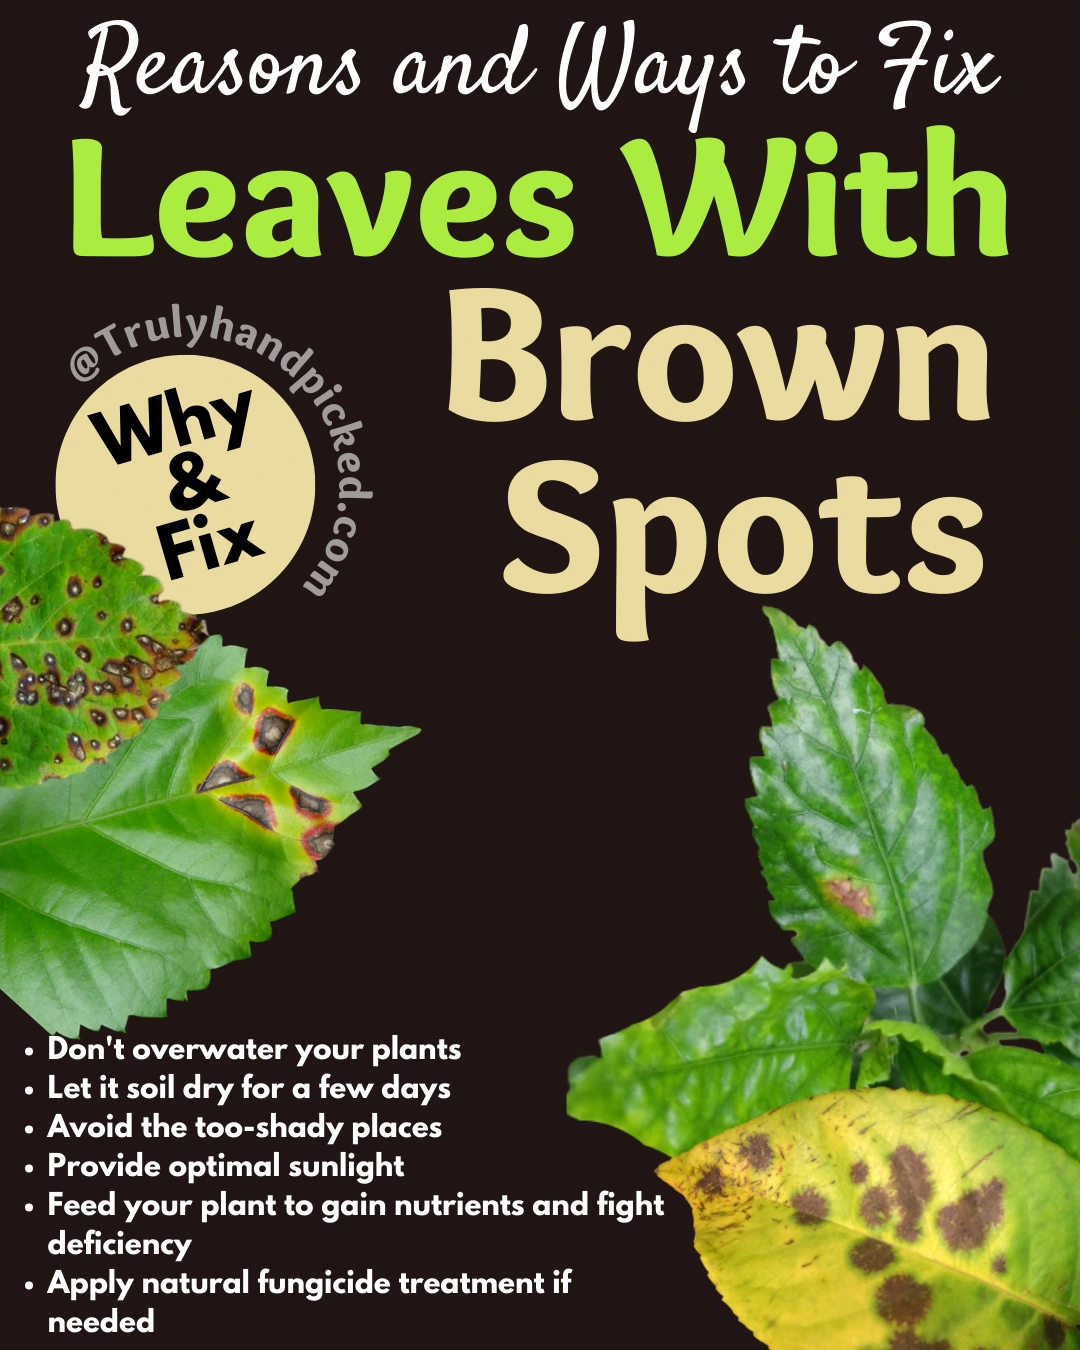 Why Brown Spots on Leaves Quick Tips to Fix